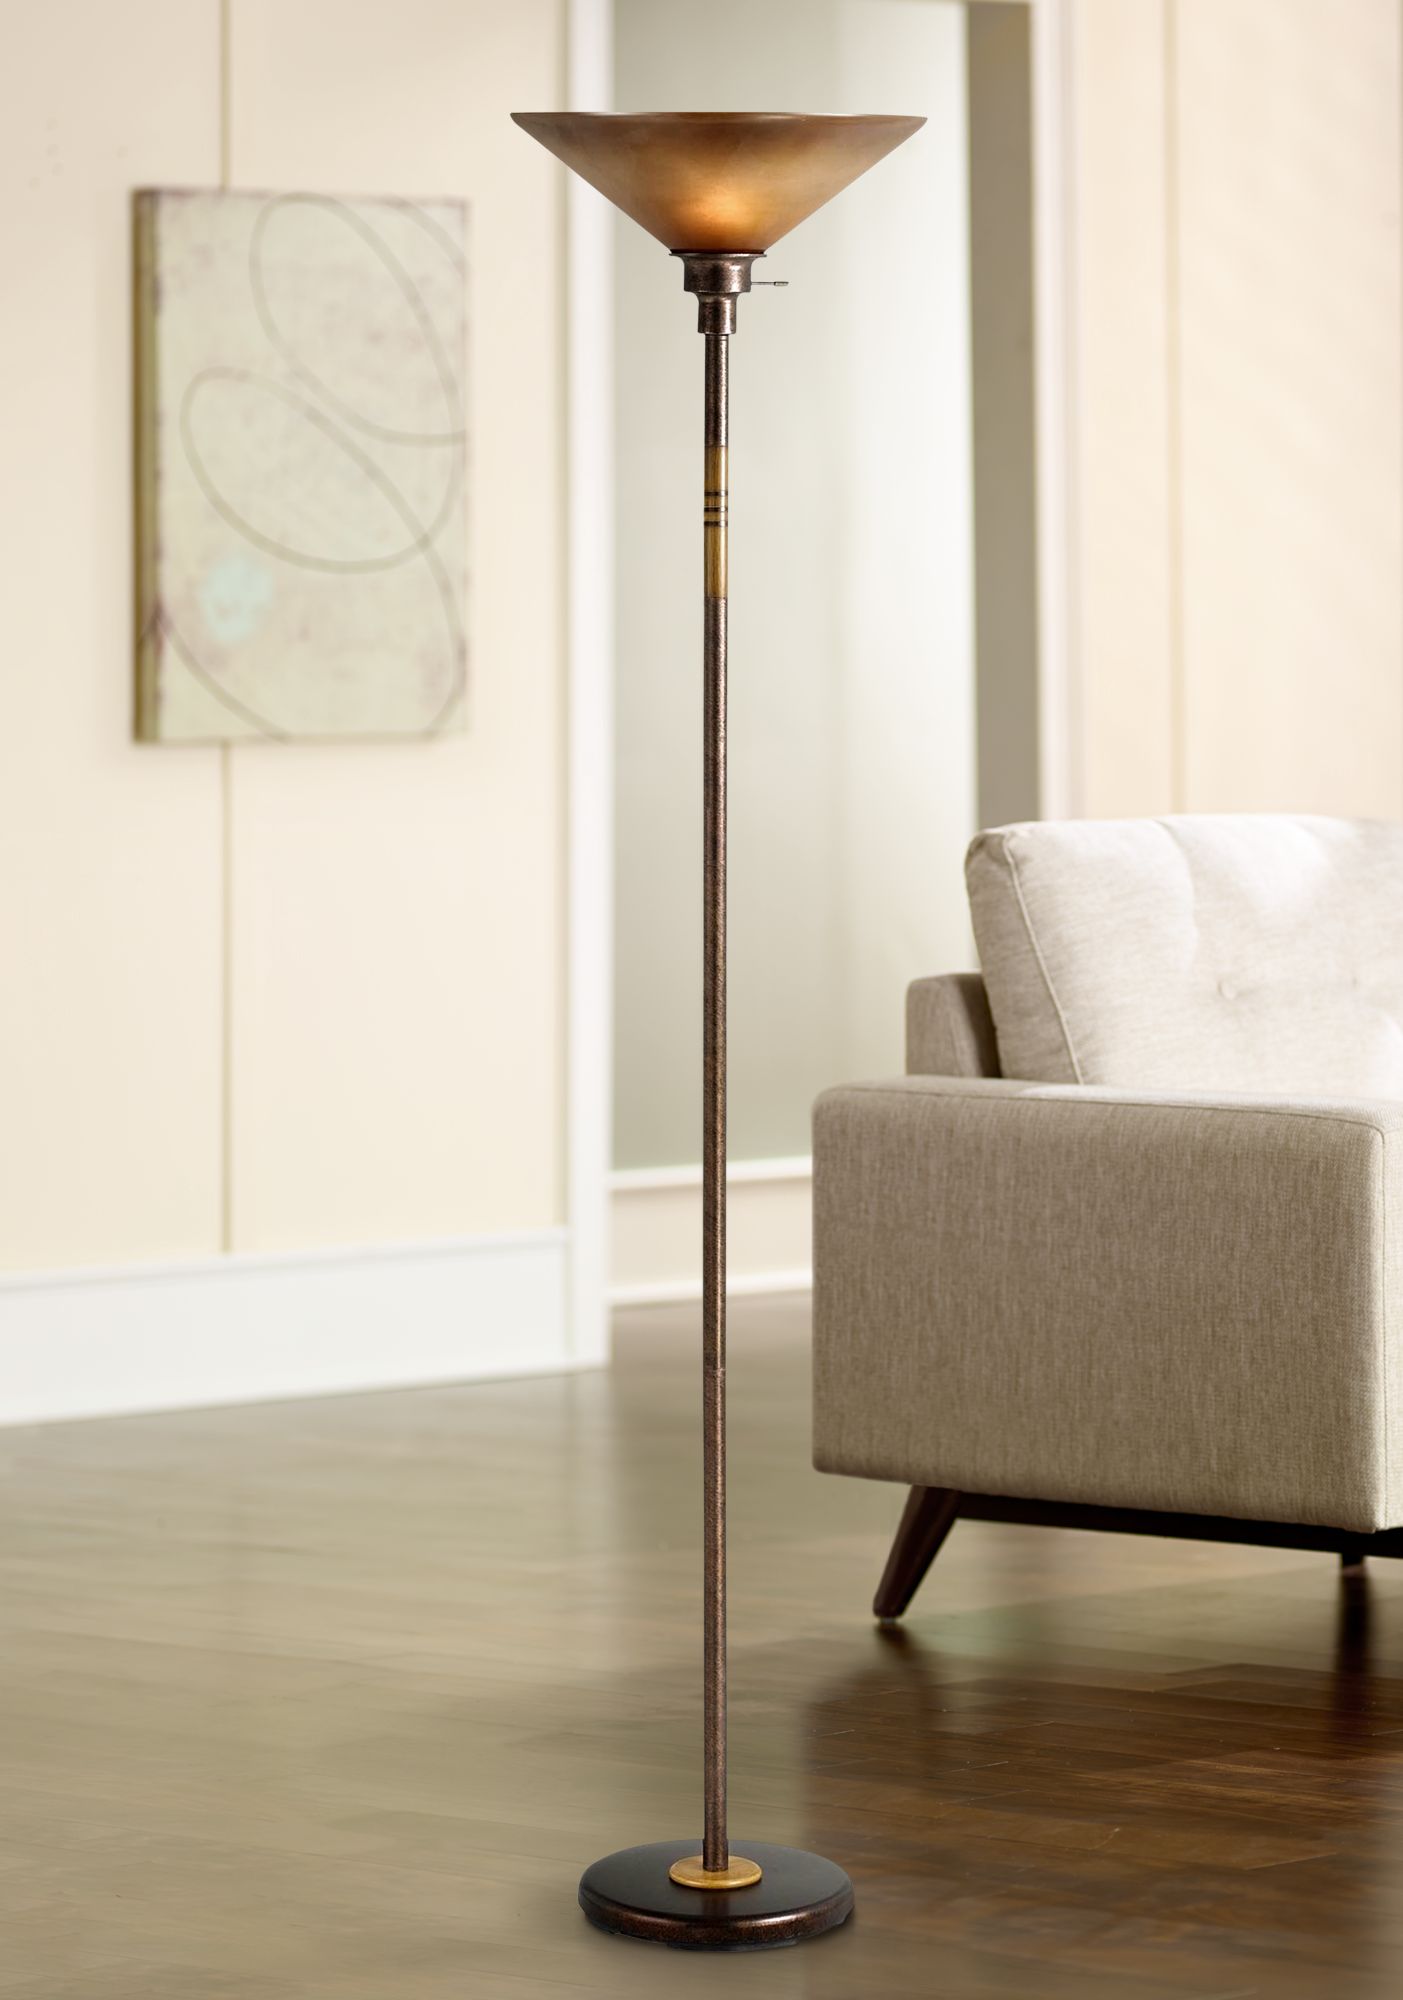 Floor lamps Soho Collection Rust-colored Torchiere floor lamp KBZBYGF